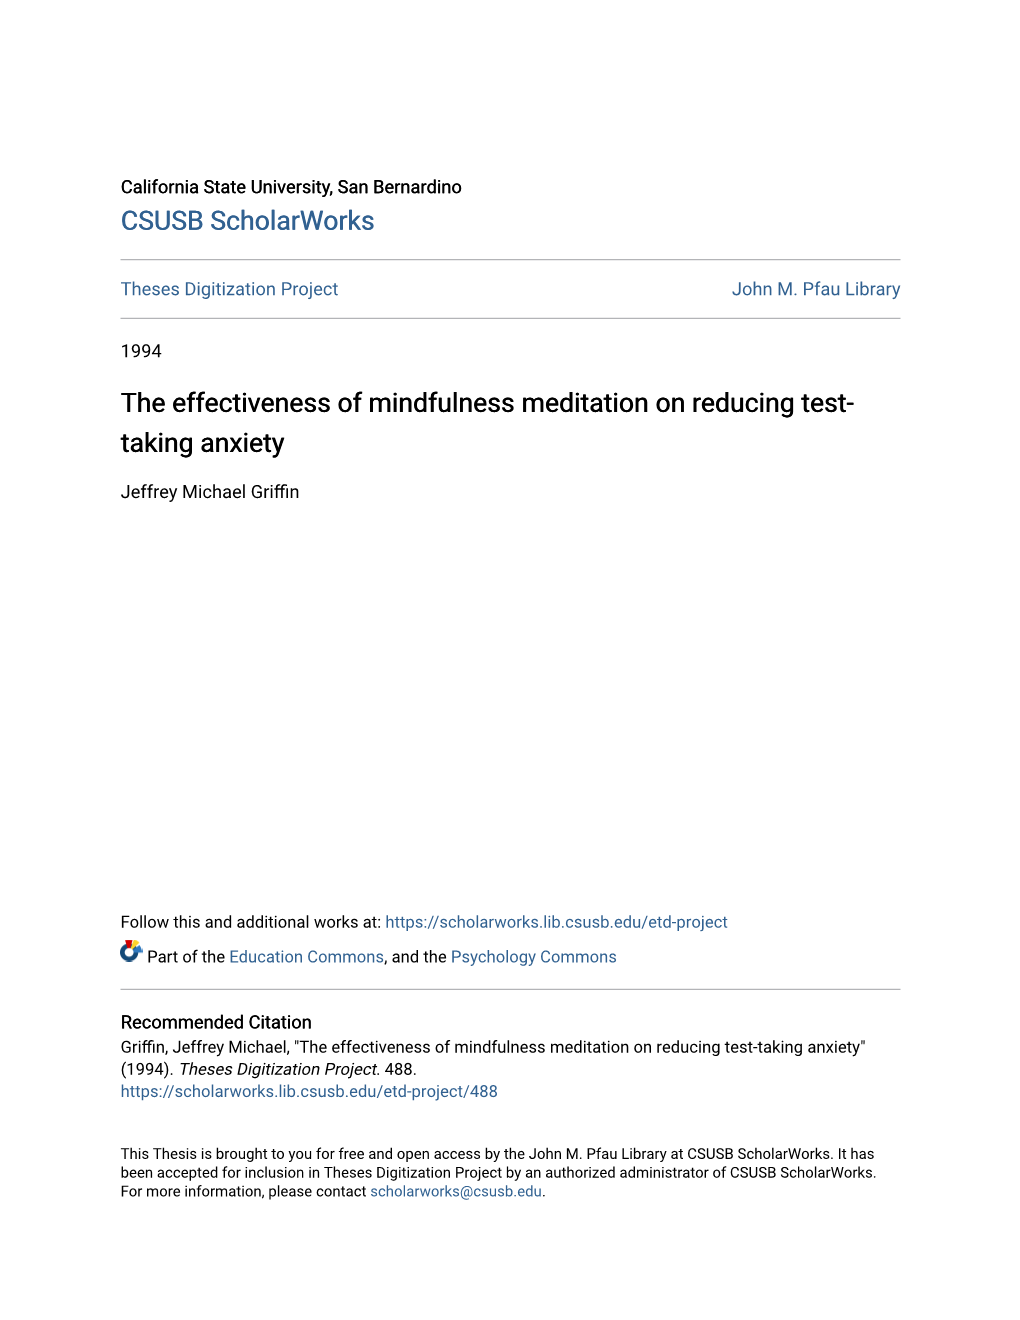 The Effectiveness of Mindfulness Meditation on Reducing Test-Taking Anxiety" (1994)